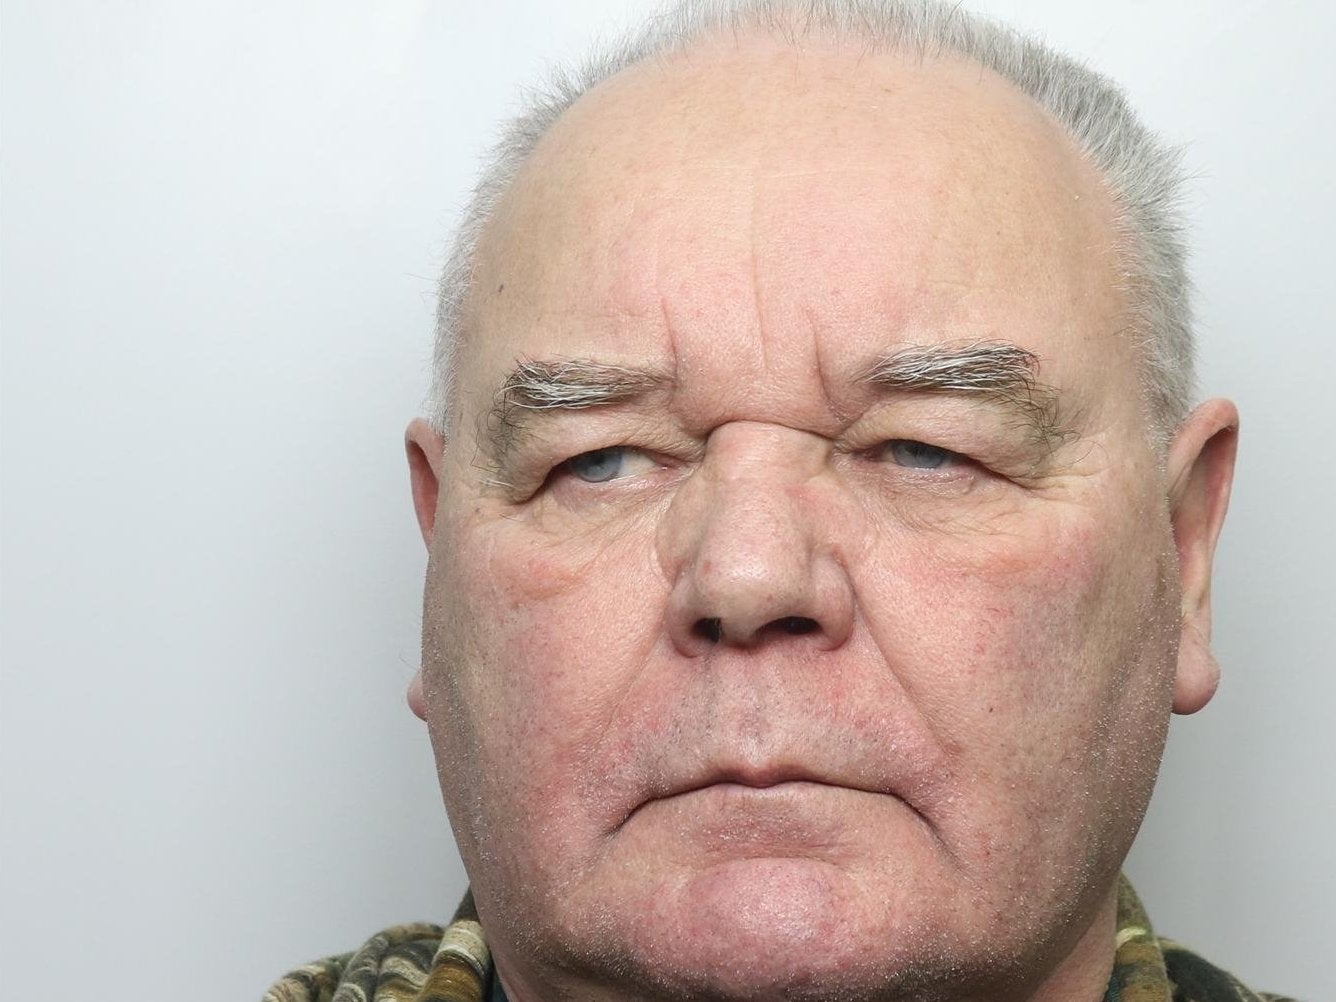 Elliott Appleyard was sentenced to 20 years in prison for sexual offences perpetrated when Ms Higgins was aged between 14 and 15